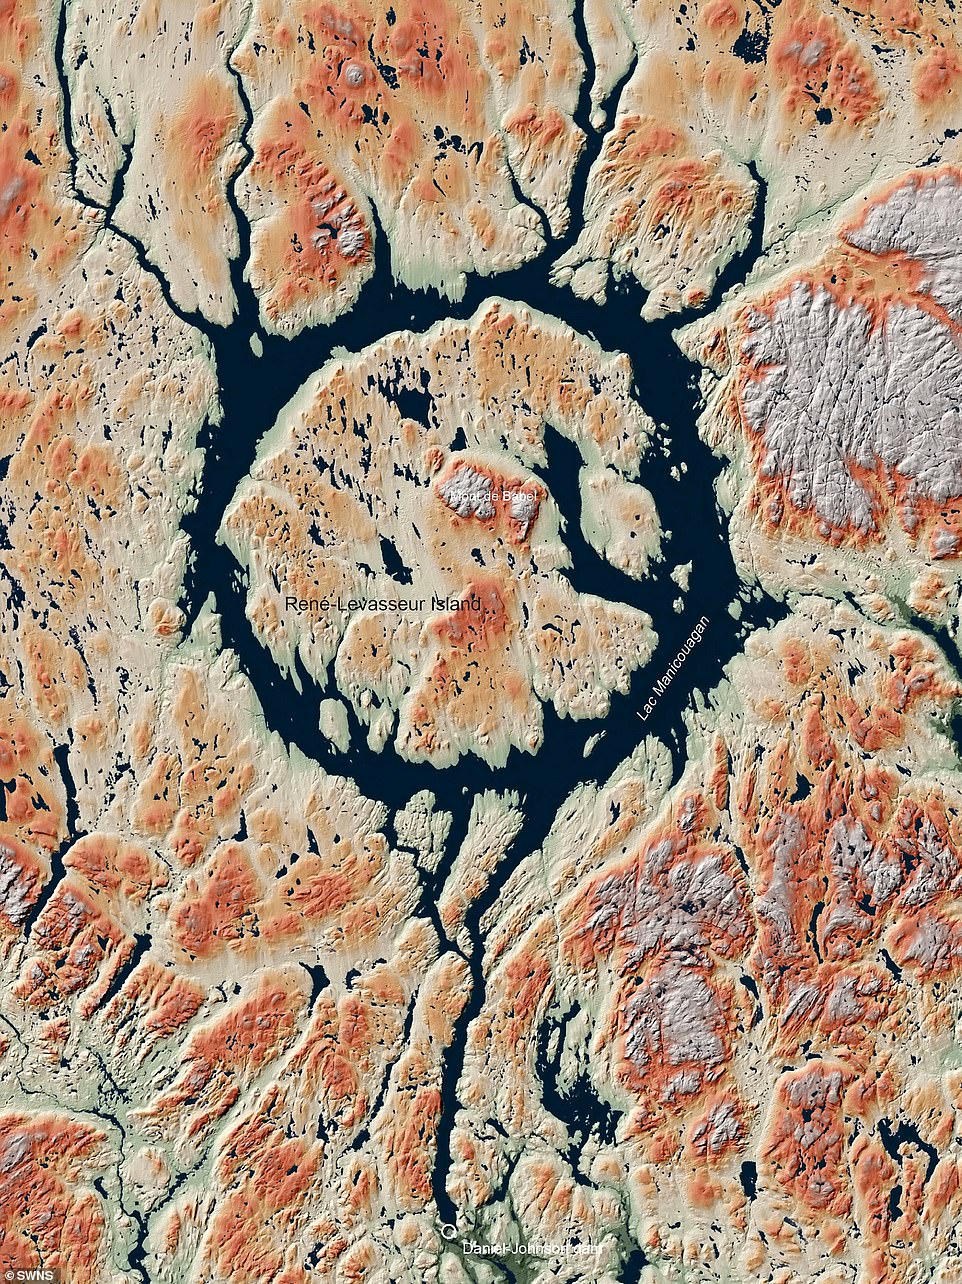 Between 2010 and 2016, researchers used a low-orbit radar satellite called the Tantem-X to measure every known abyss on the Earth's surface with an accuracy of up to a meter.  Image: Manichaean crater in Quebec, Canada